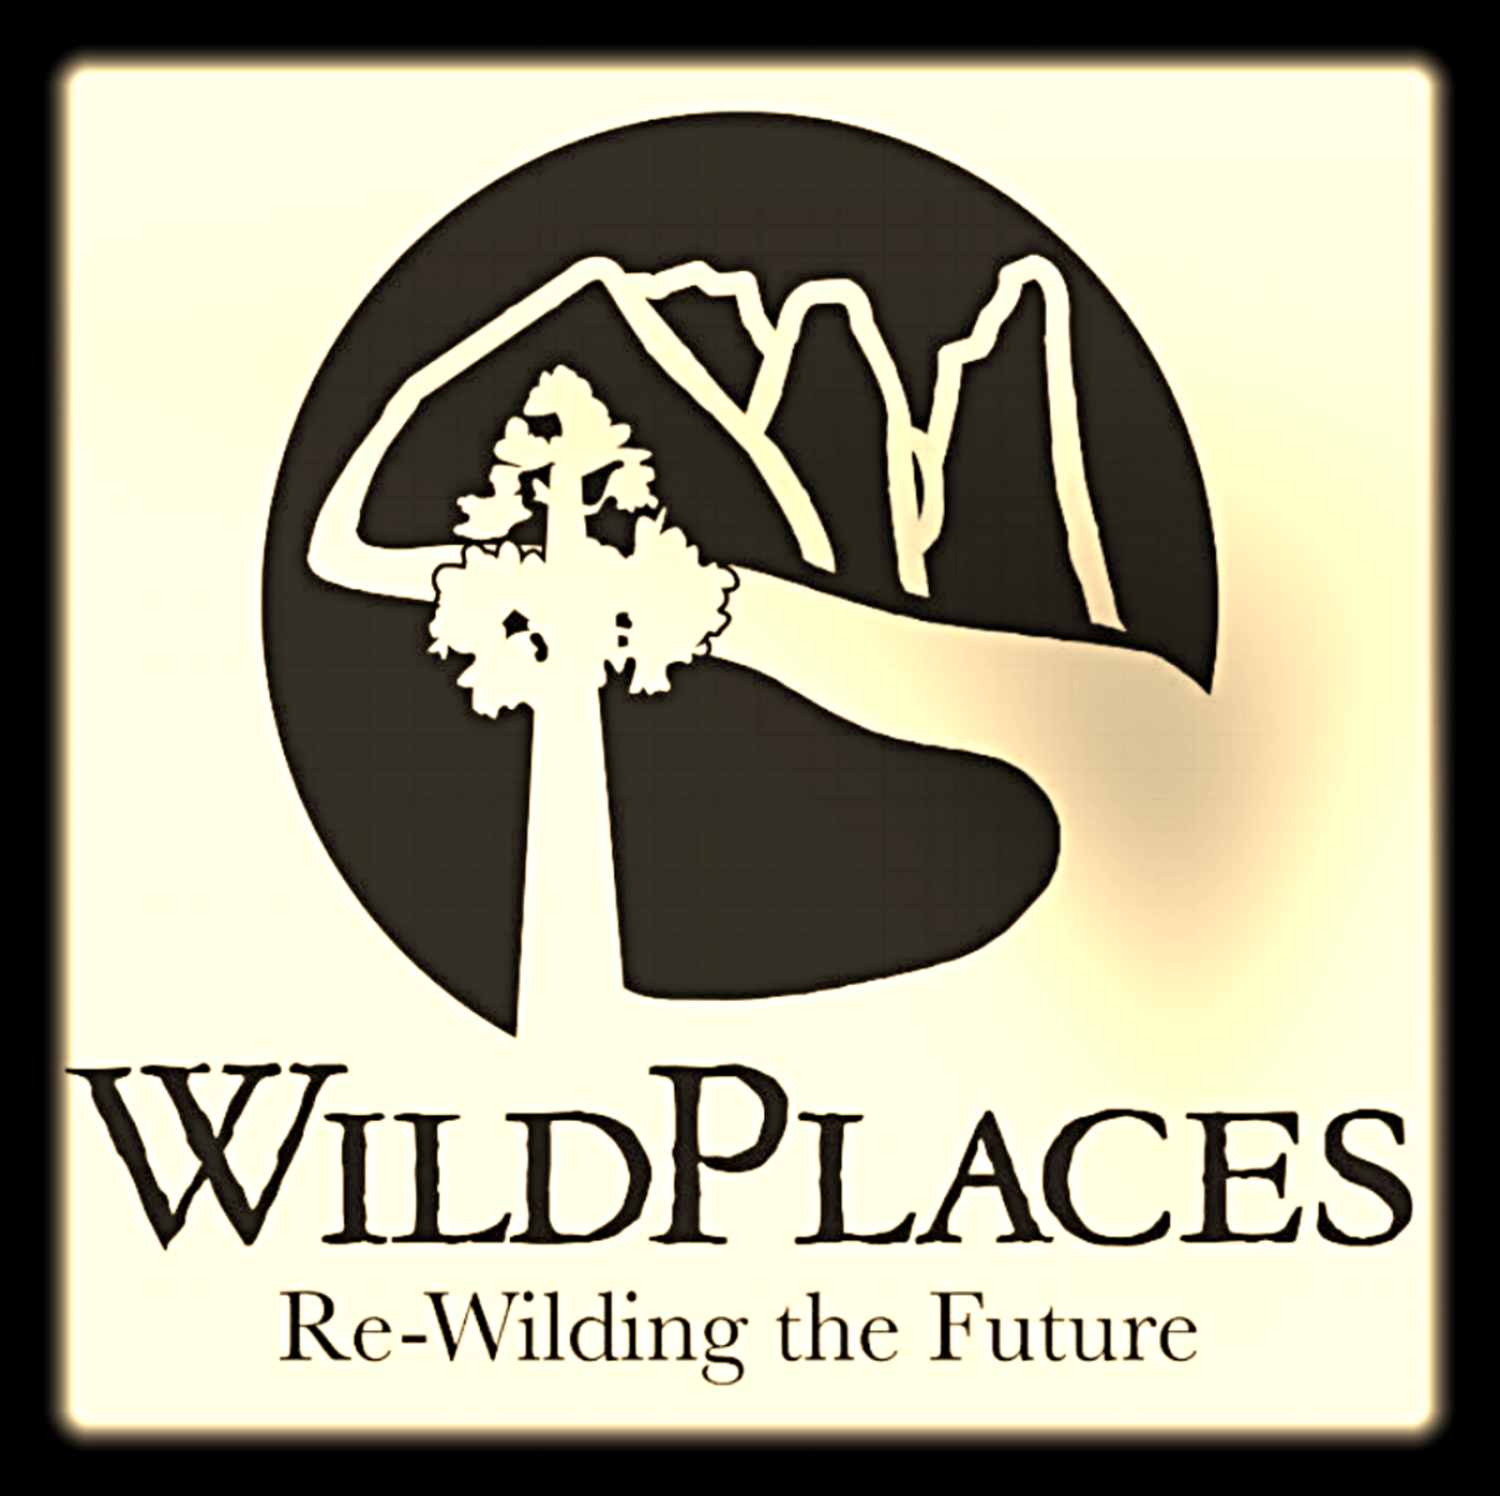 Porterville College Logo - Immersed in the Wild: Porterville College M.E.Ch.A Club — WildPlaces